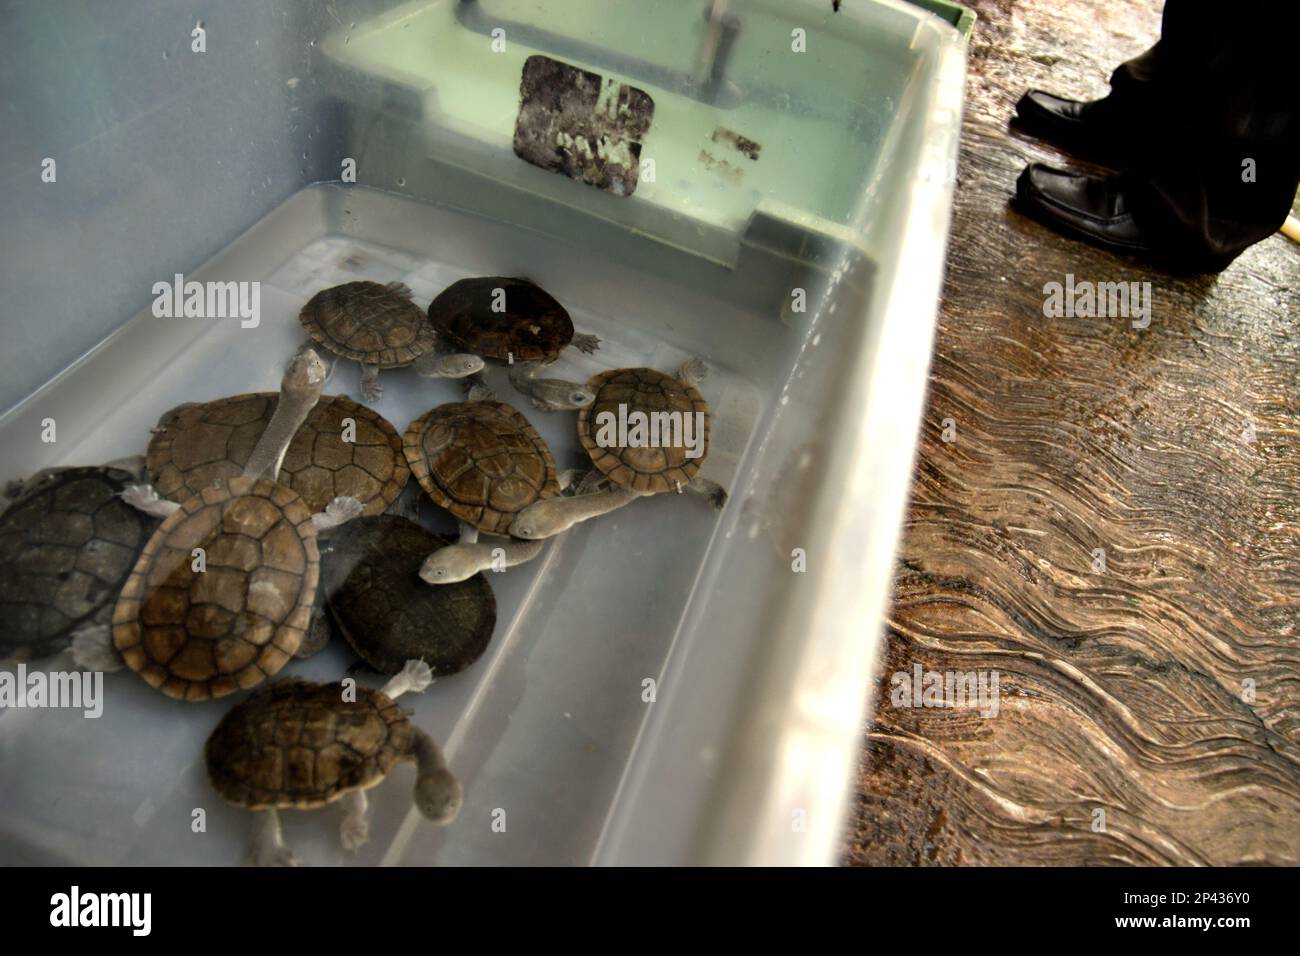 Rare and threatened species of freshwater turtle, the critically endangered Rote Island's endemic snake-necked turtles (Chelodina mccordi) are photographed at a licensed ex-situ breeding farm in Jakarta, Indonesia. Scientific research suggests that reptile richness is likely to decrease significantly across most parts of the world with ongoing future climate change. Stock Photo